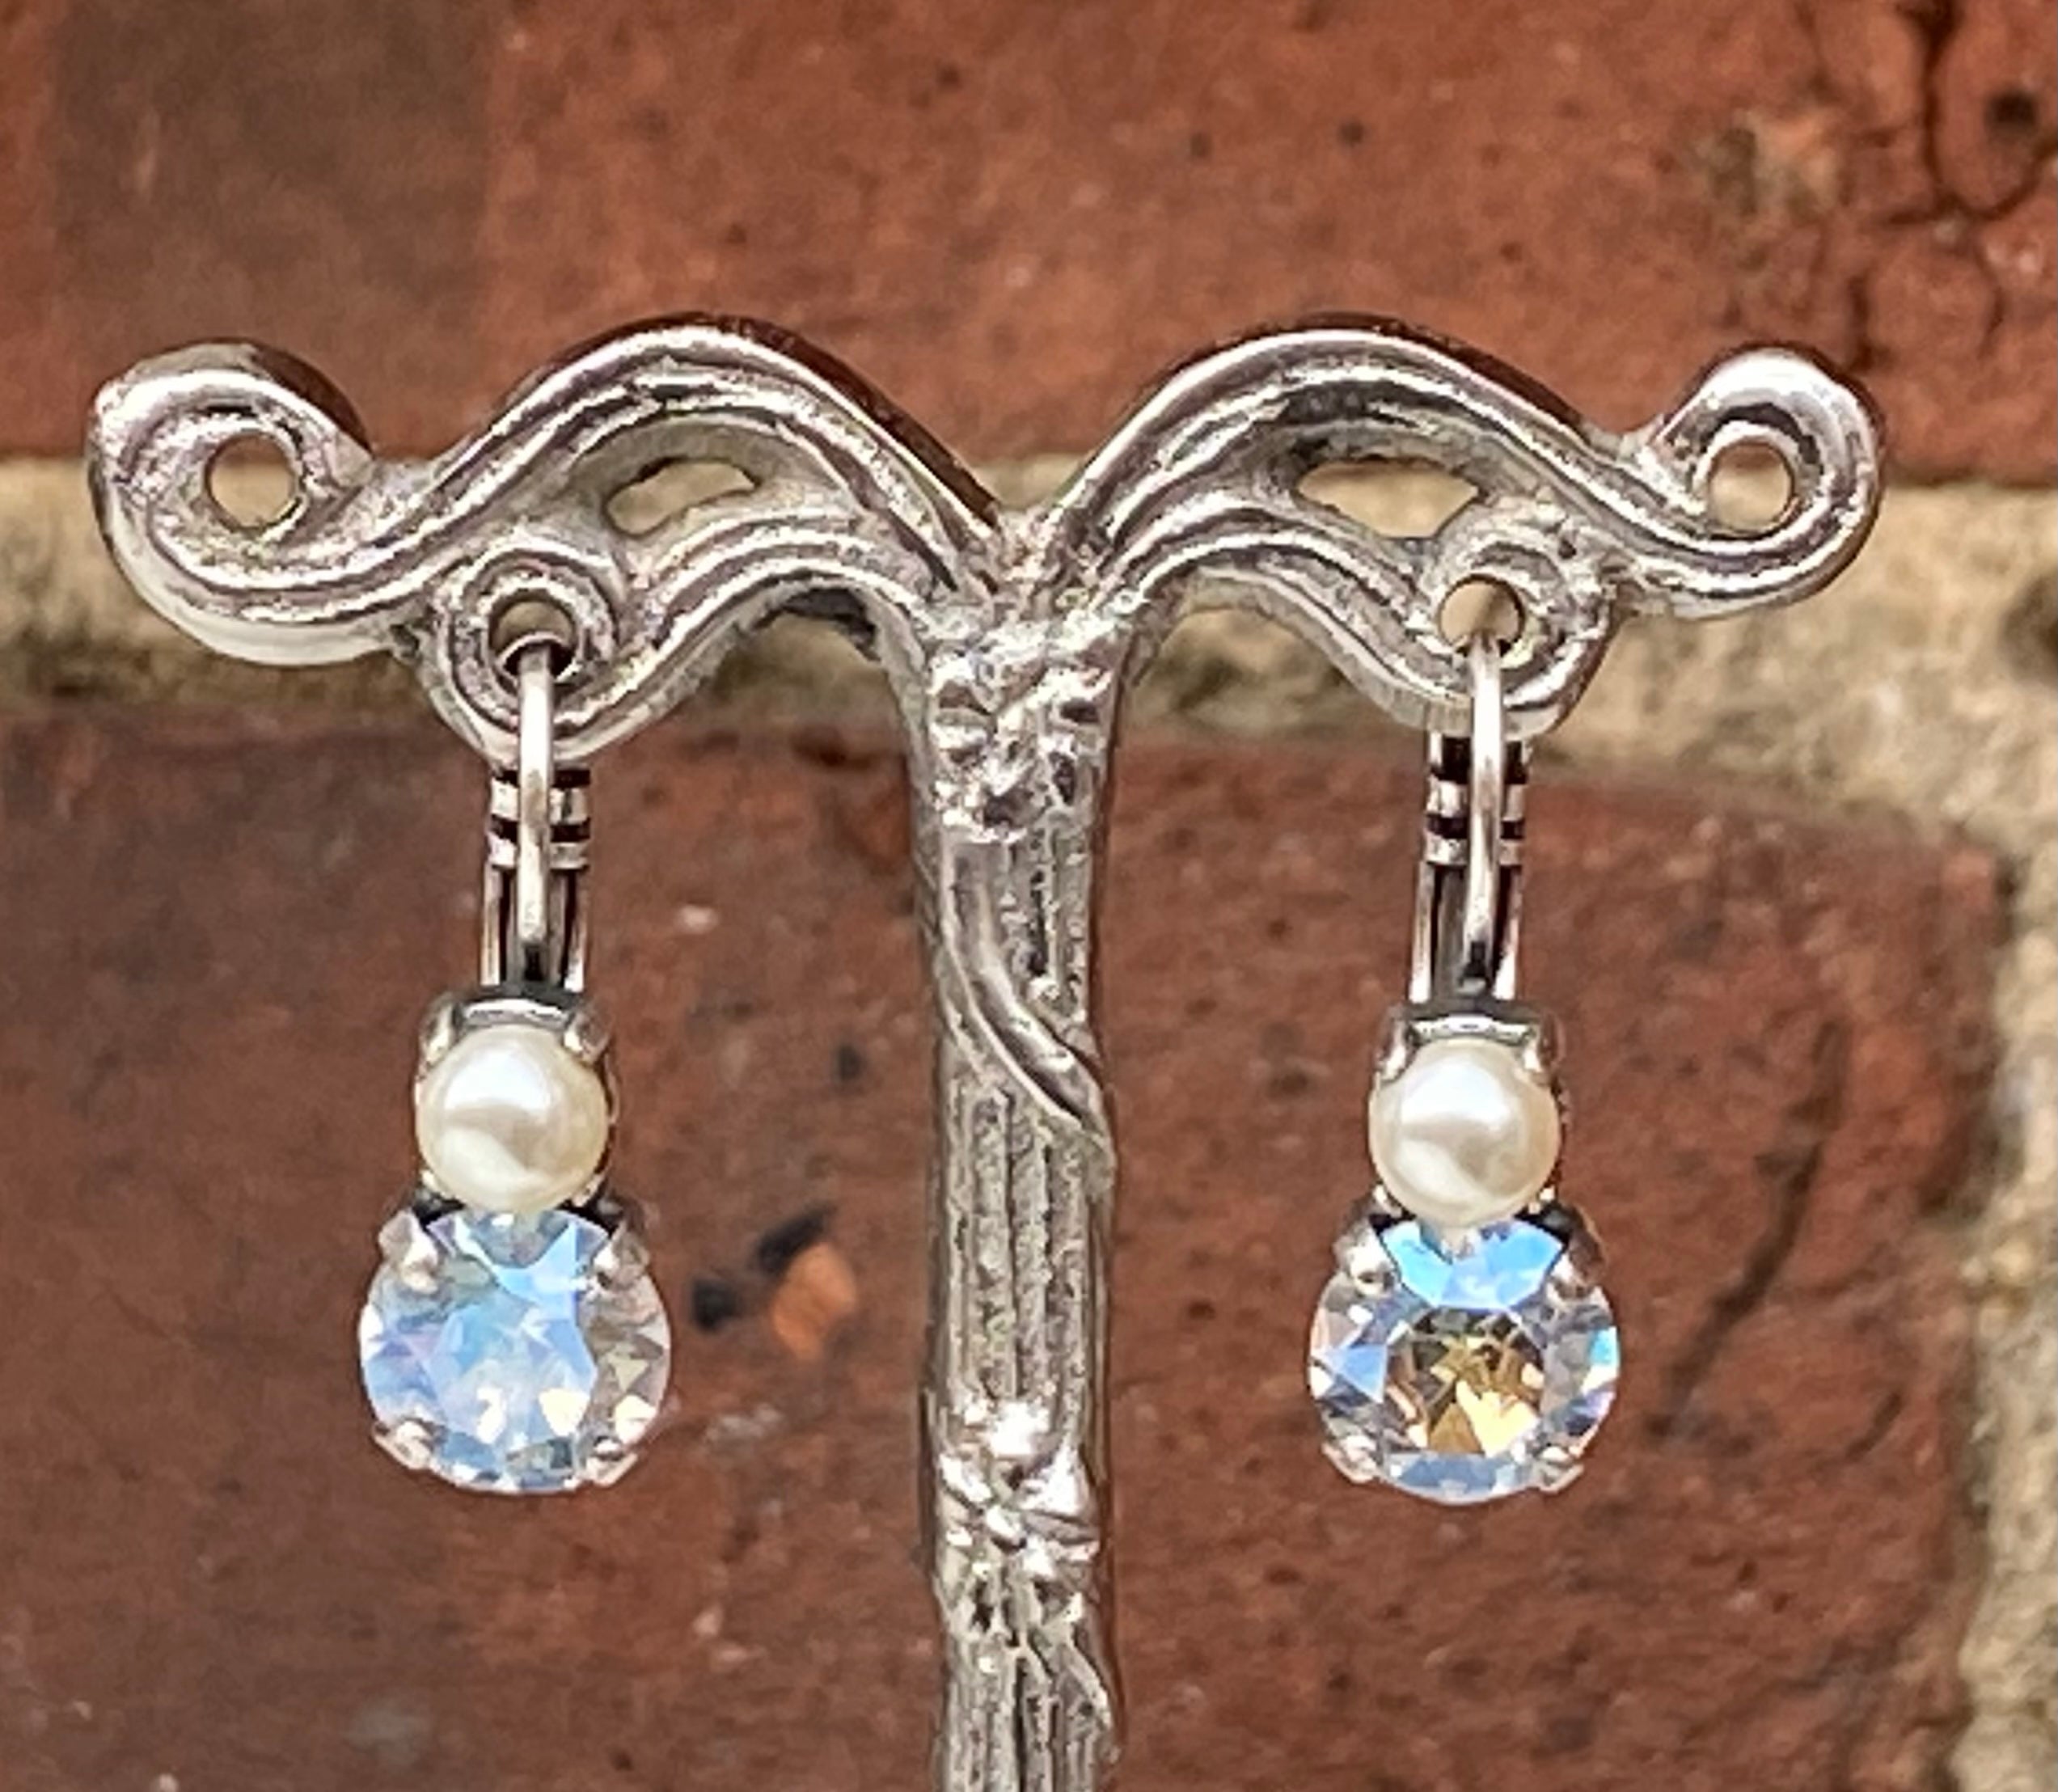 Mariana Antique Silver Must-Have Double Stone Crystal Leverback Earrings in “Champagne & Caviar”